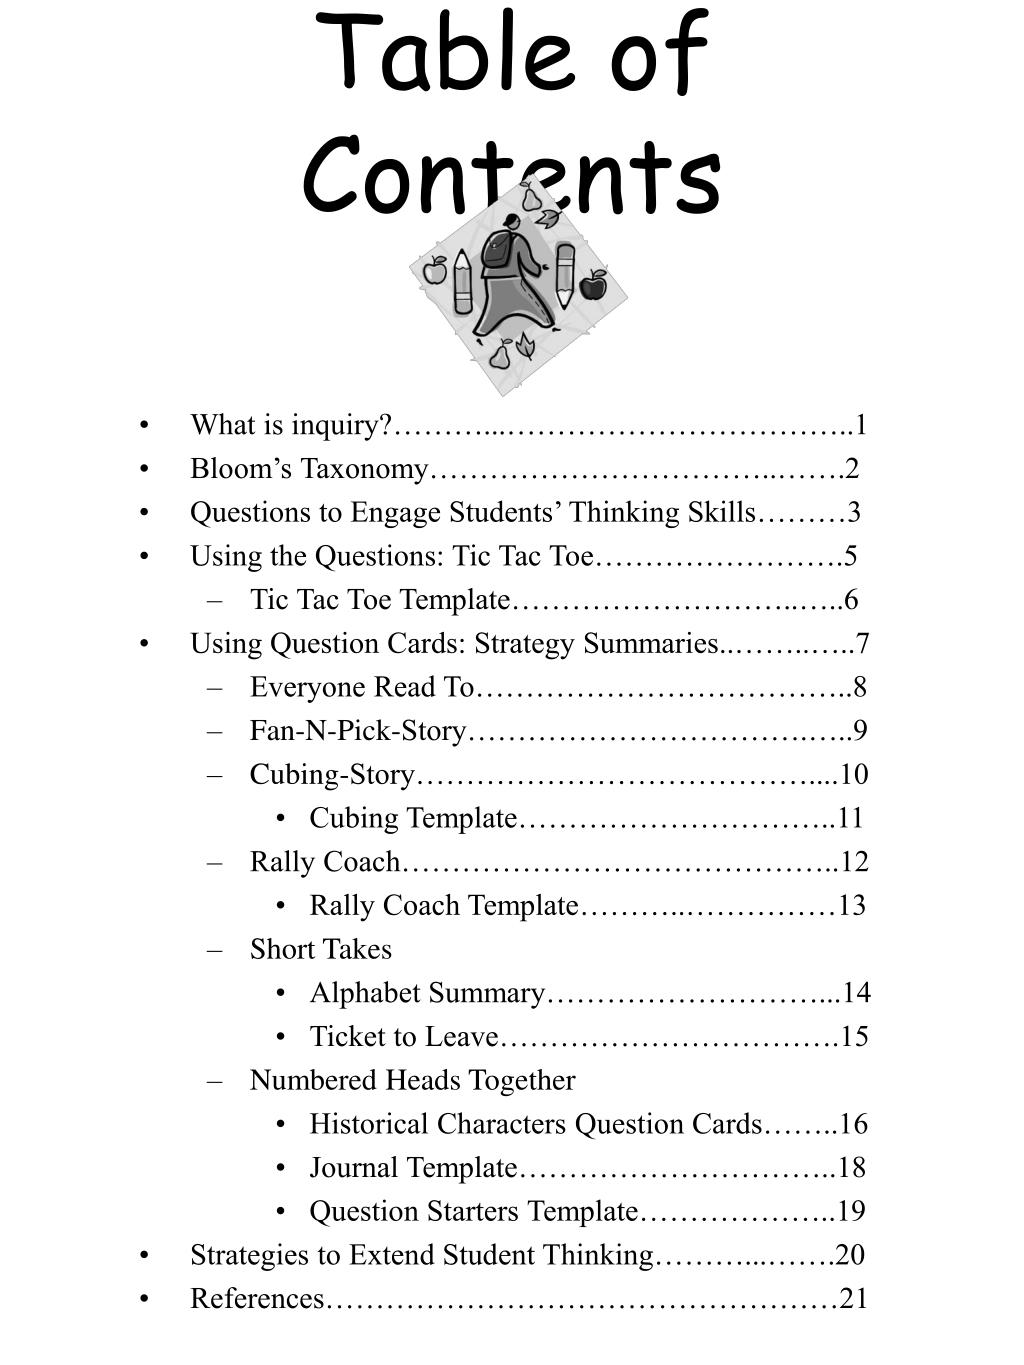 example of assignment table of contents